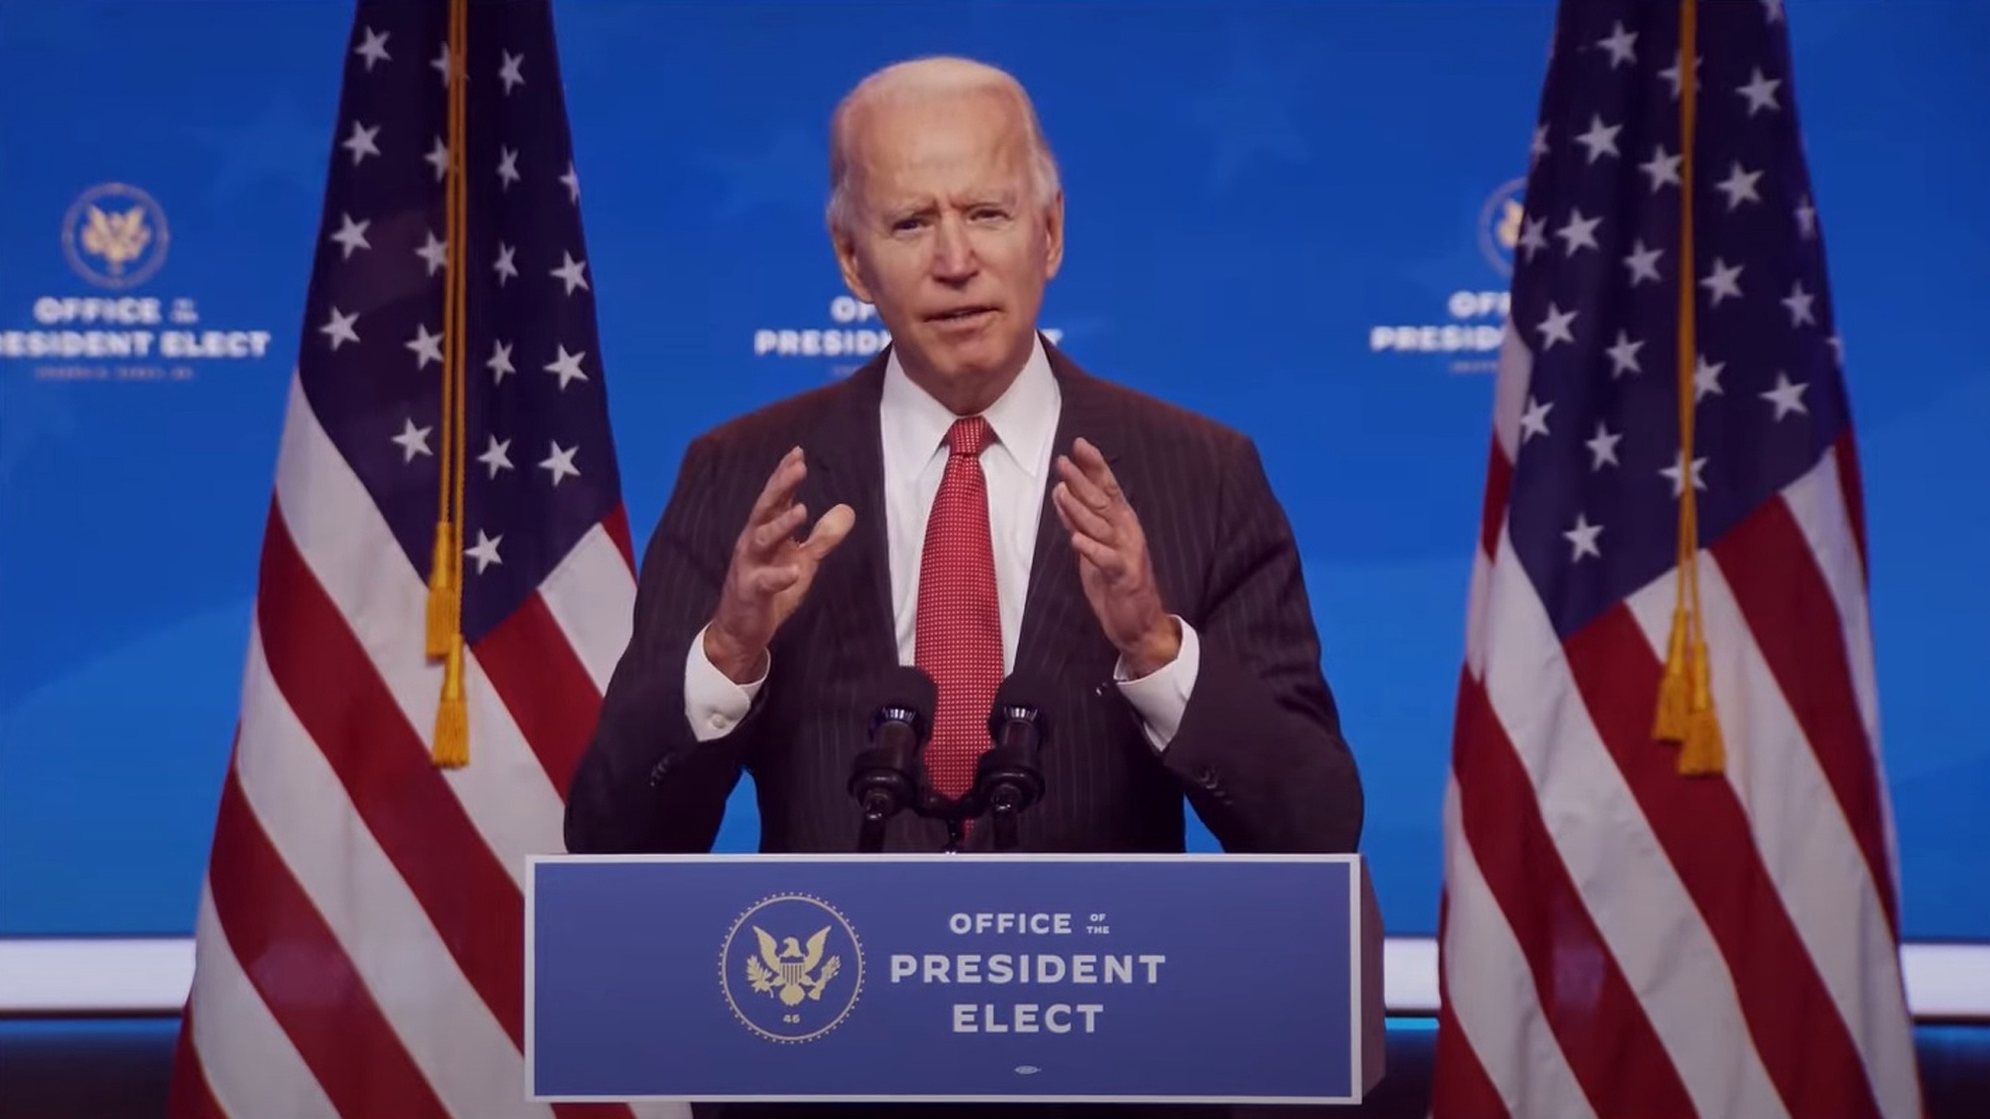 epa08830999 A frame grab from a handout video released by the Office of the President Elect shows US President-Elect Joseph R. Biden addressing the media during a press conference in Wilmington, Delaware, USA, 19 November 2020 (issued 20 November 2020). Georgia state authorities confirmed 19 November US President-elect Joe Biden won the the election in Georgia following a recount. It was the first time the Democrats won a presidential election race in Georgia since 1992 when Bill Clinton was elected.  EPA/OFFICE OF THE PRESIDENT ELECT/HANDOUT BEST QUALITY AVAILABLE HANDOUT EDITORIAL USE ONLY/NO SALES